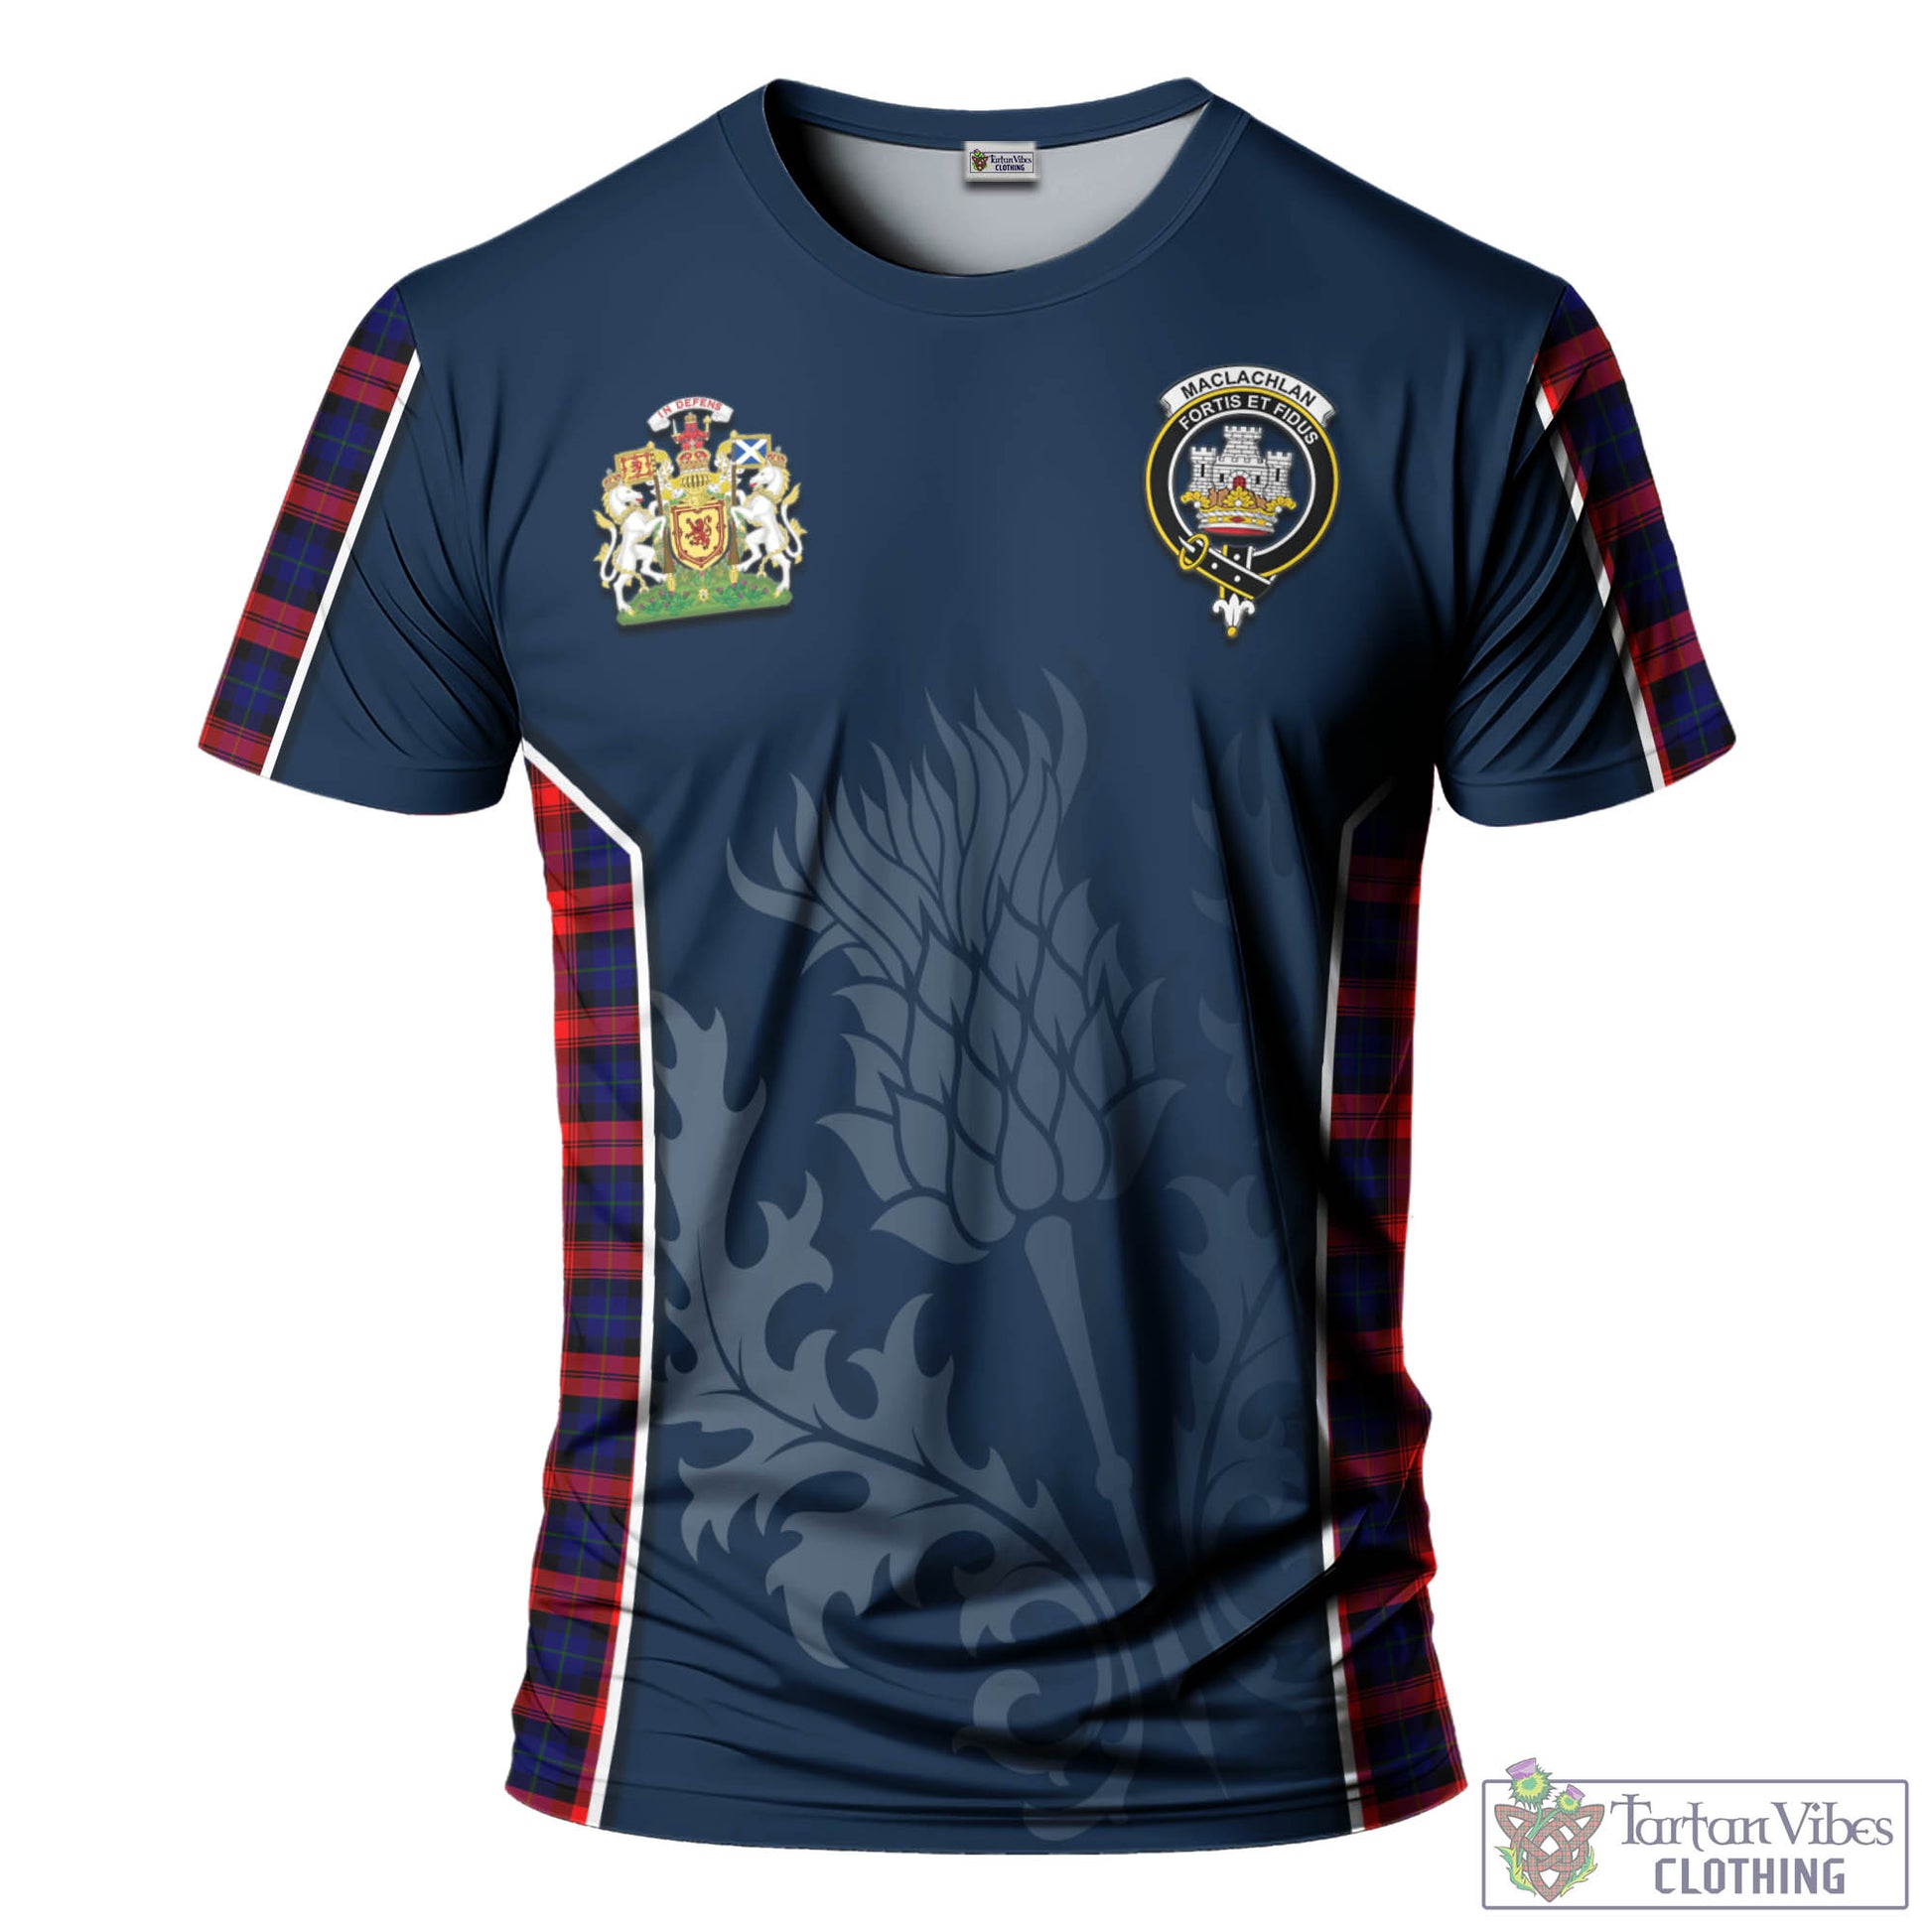 Tartan Vibes Clothing MacLachlan Modern Tartan T-Shirt with Family Crest and Scottish Thistle Vibes Sport Style